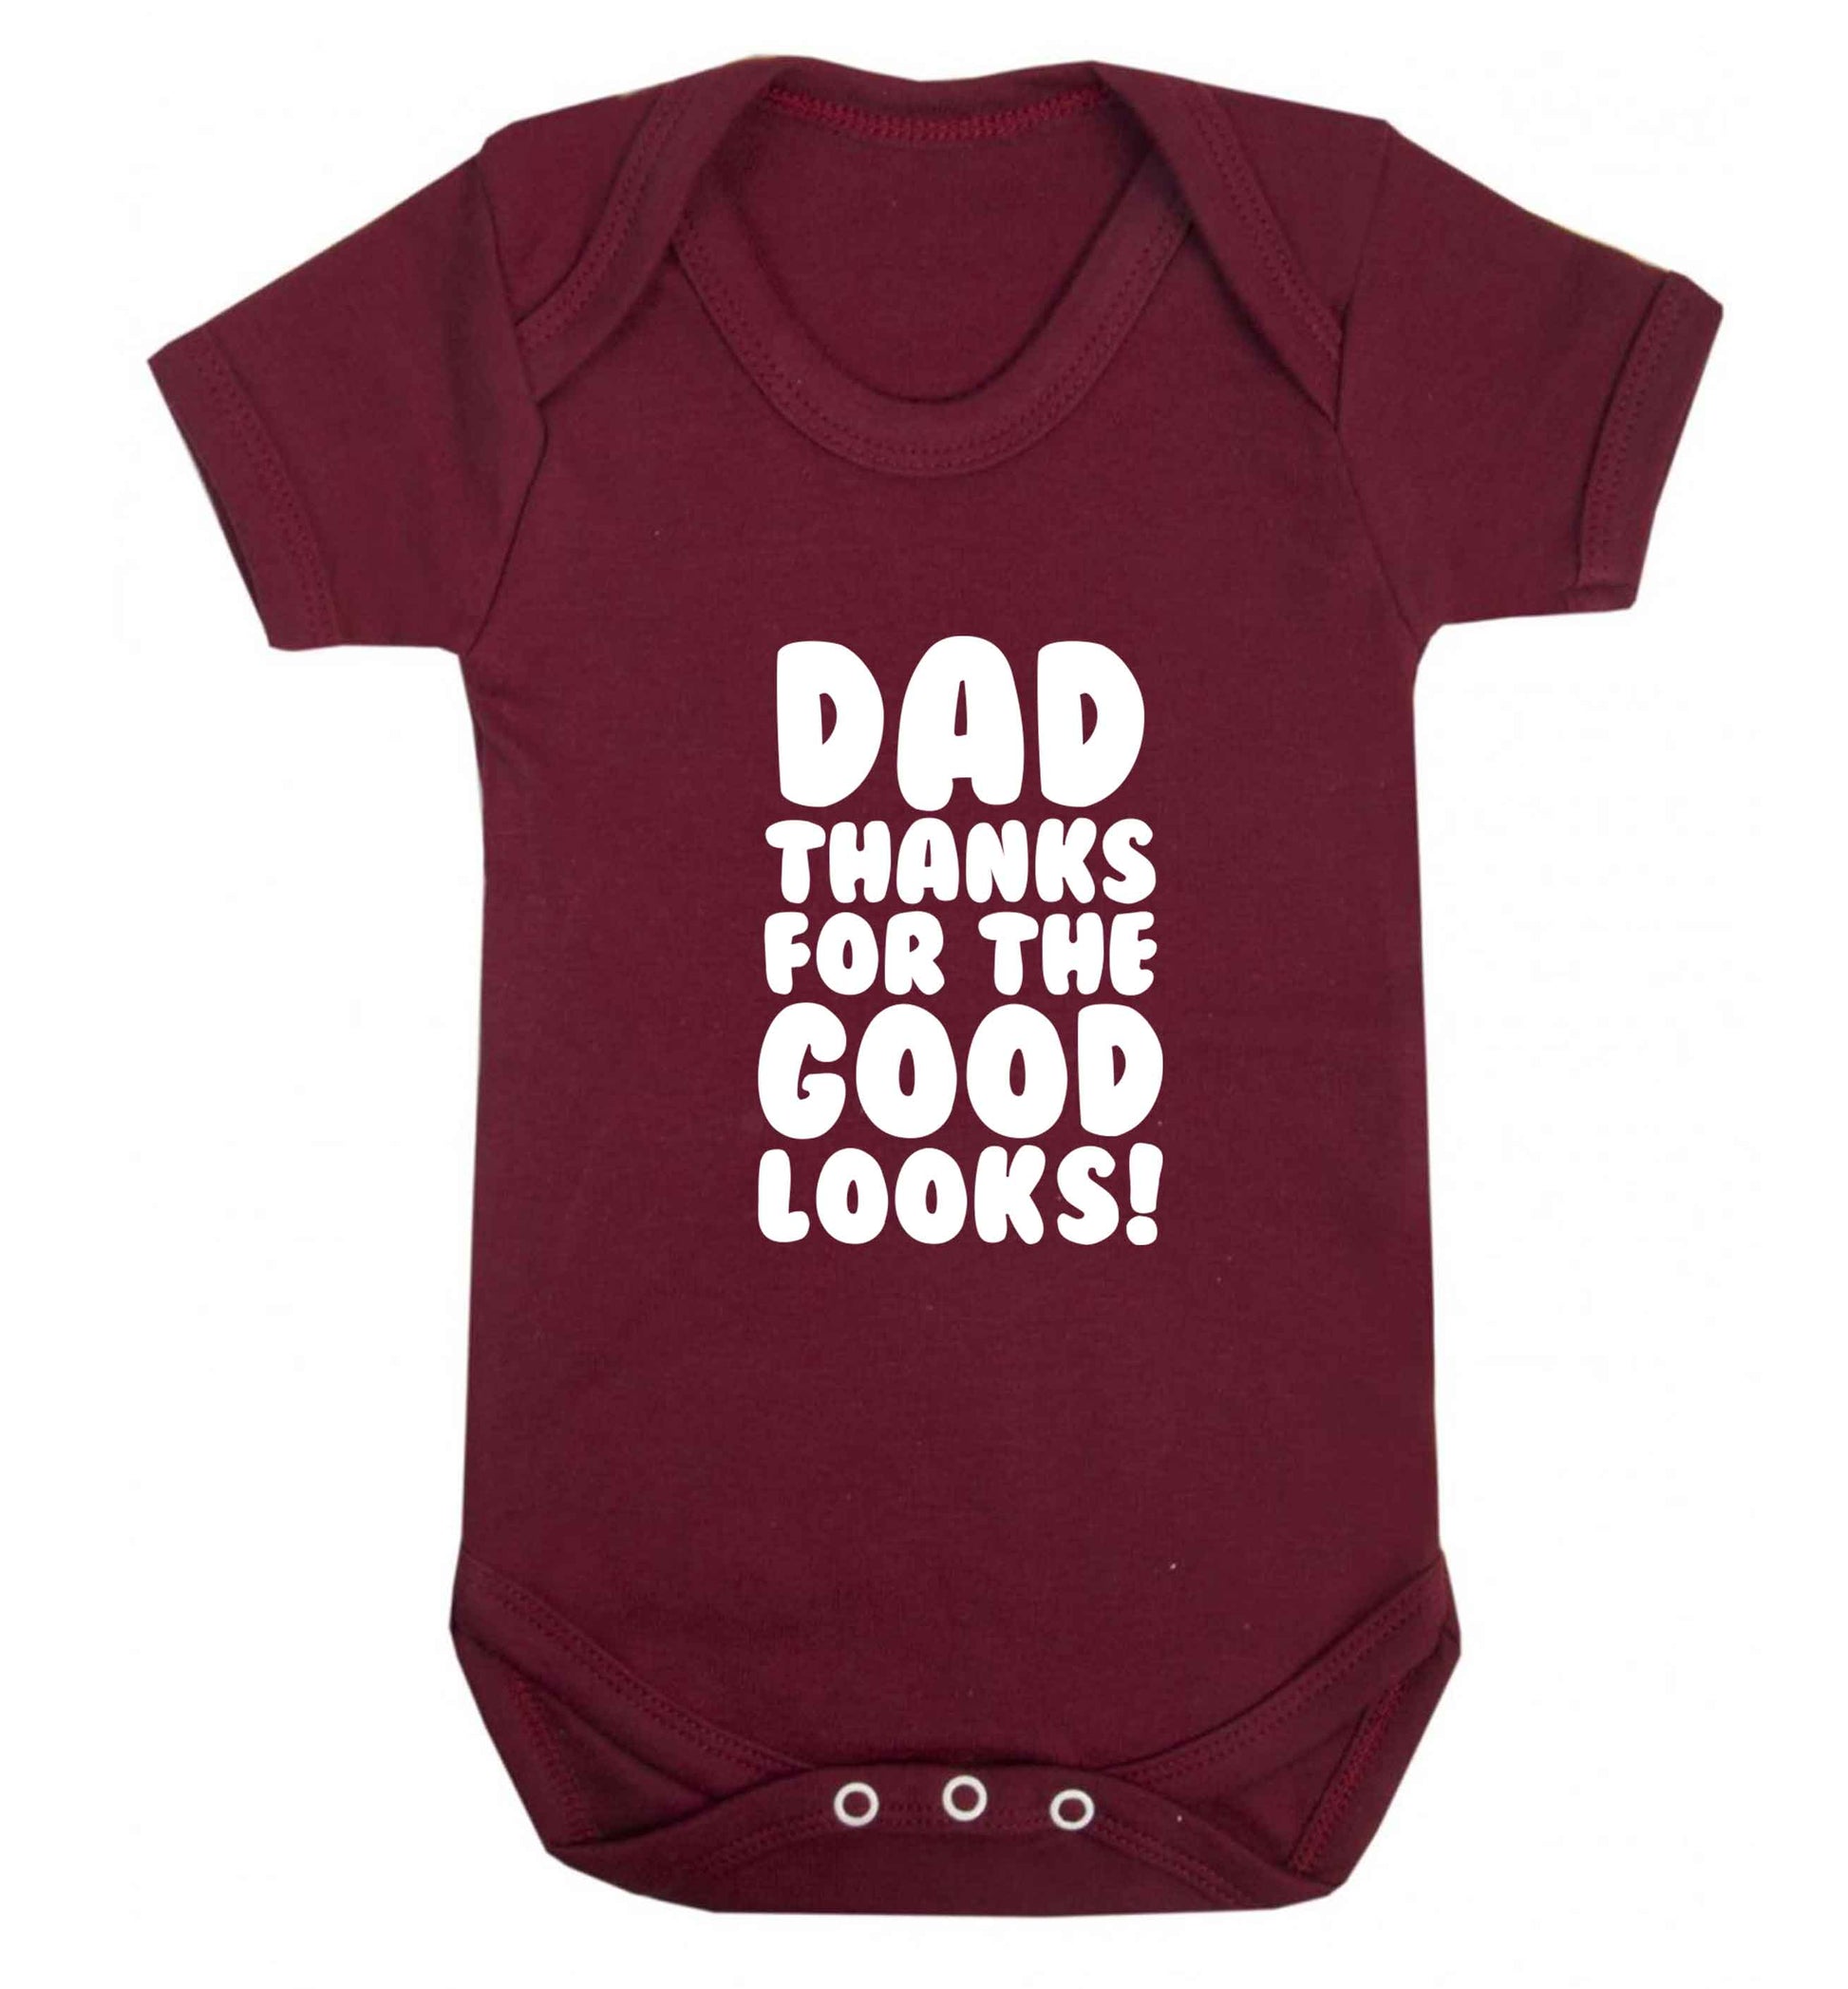 Dad thanks for the good looks baby vest maroon 18-24 months